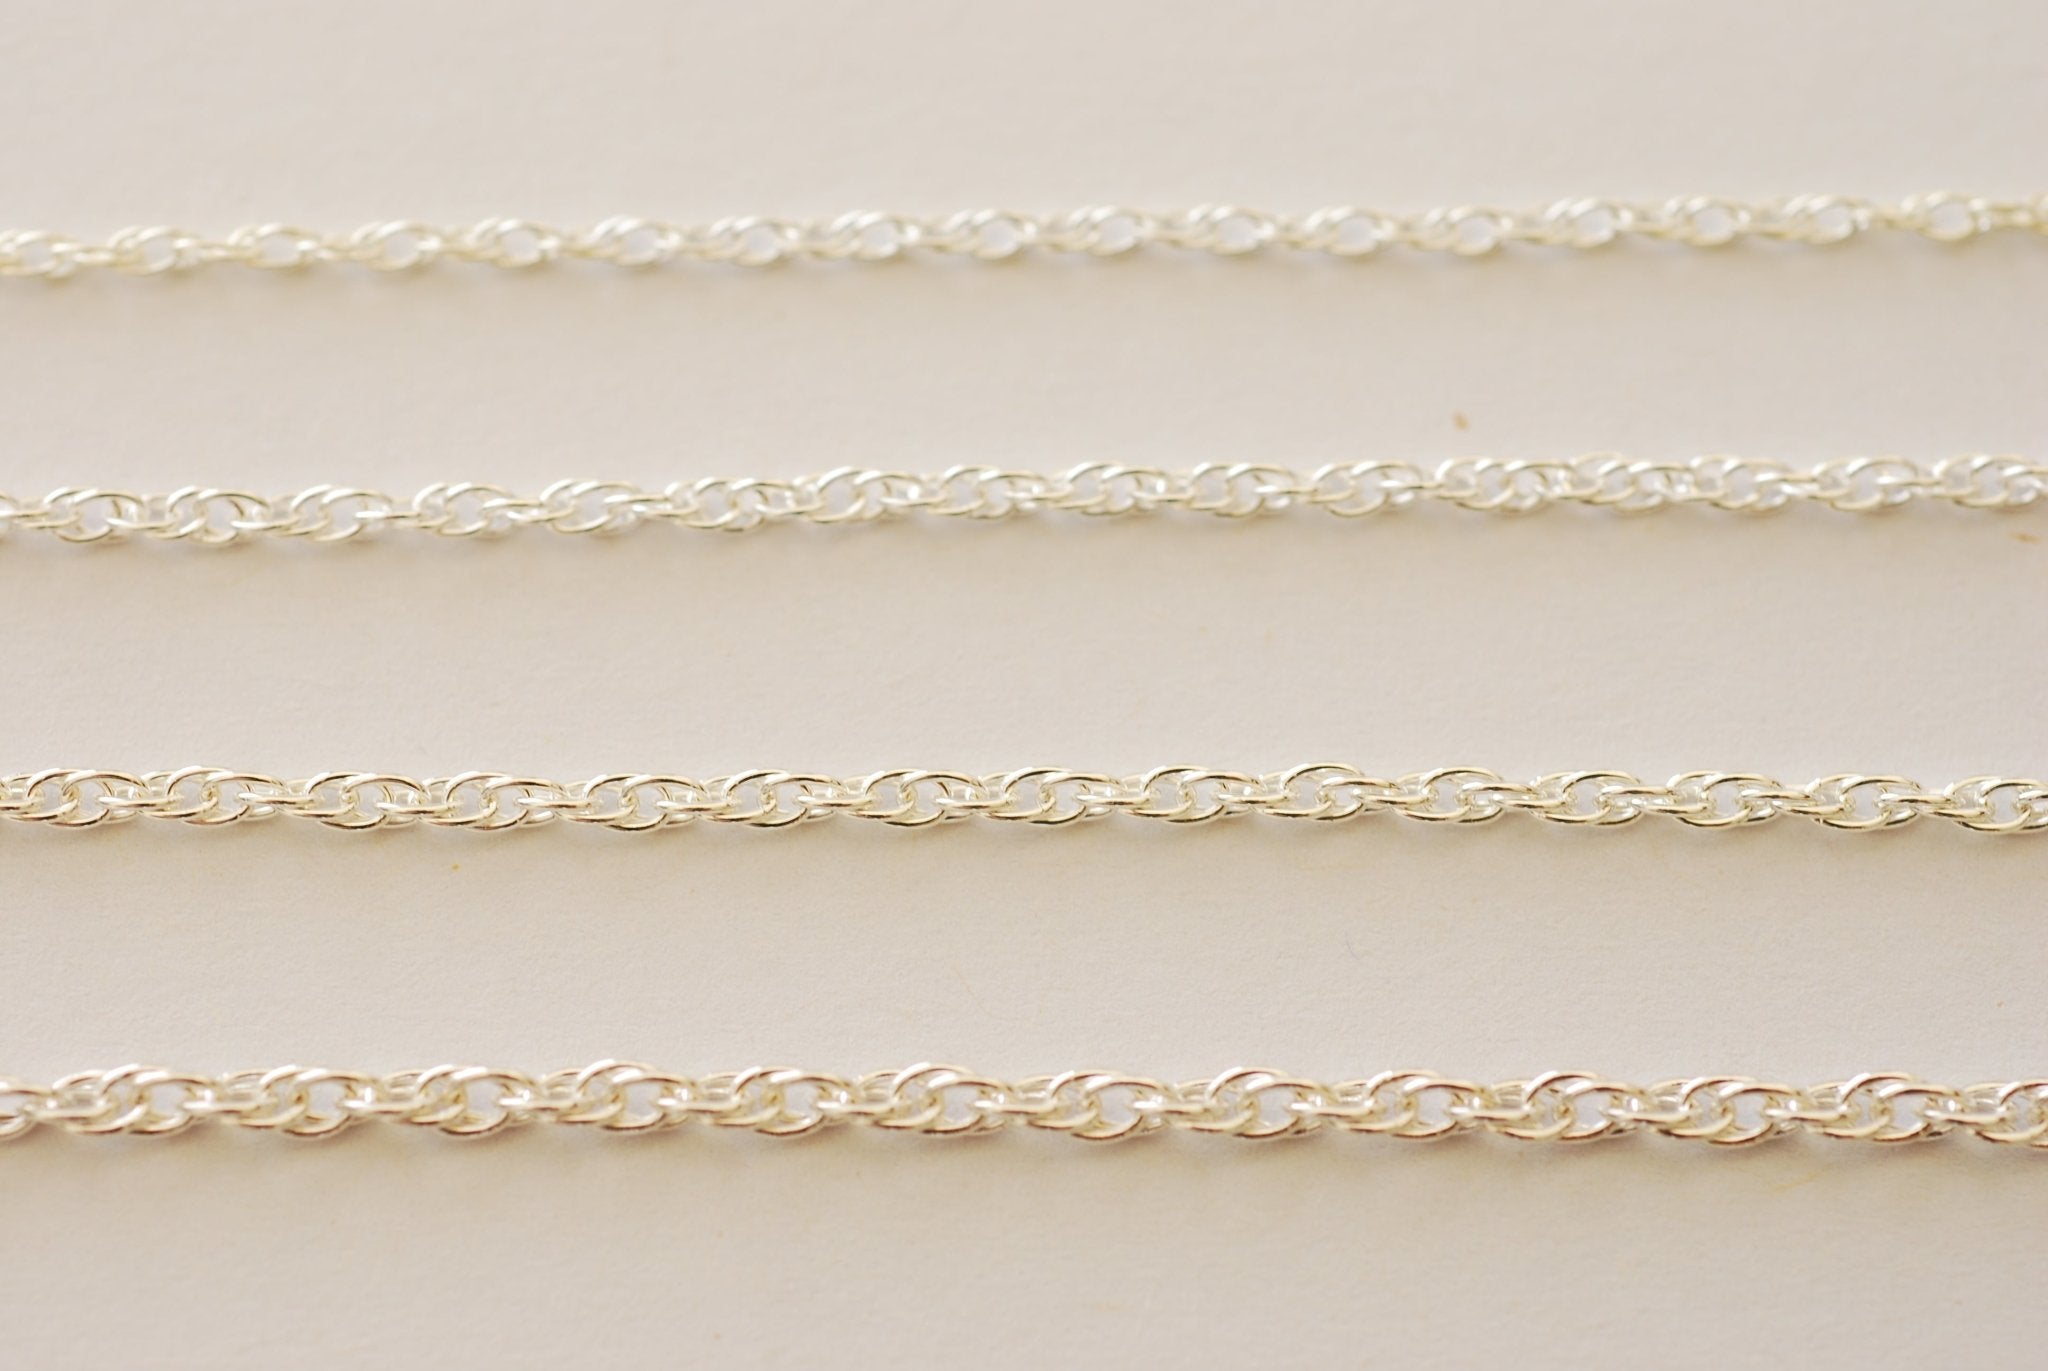 Wholesale Gold Filled Rope Chain l 1.5mm 1.75mm 2mm 2.3mm Rope Chain Chain Unfinished Sterling Silver - HarperCrown